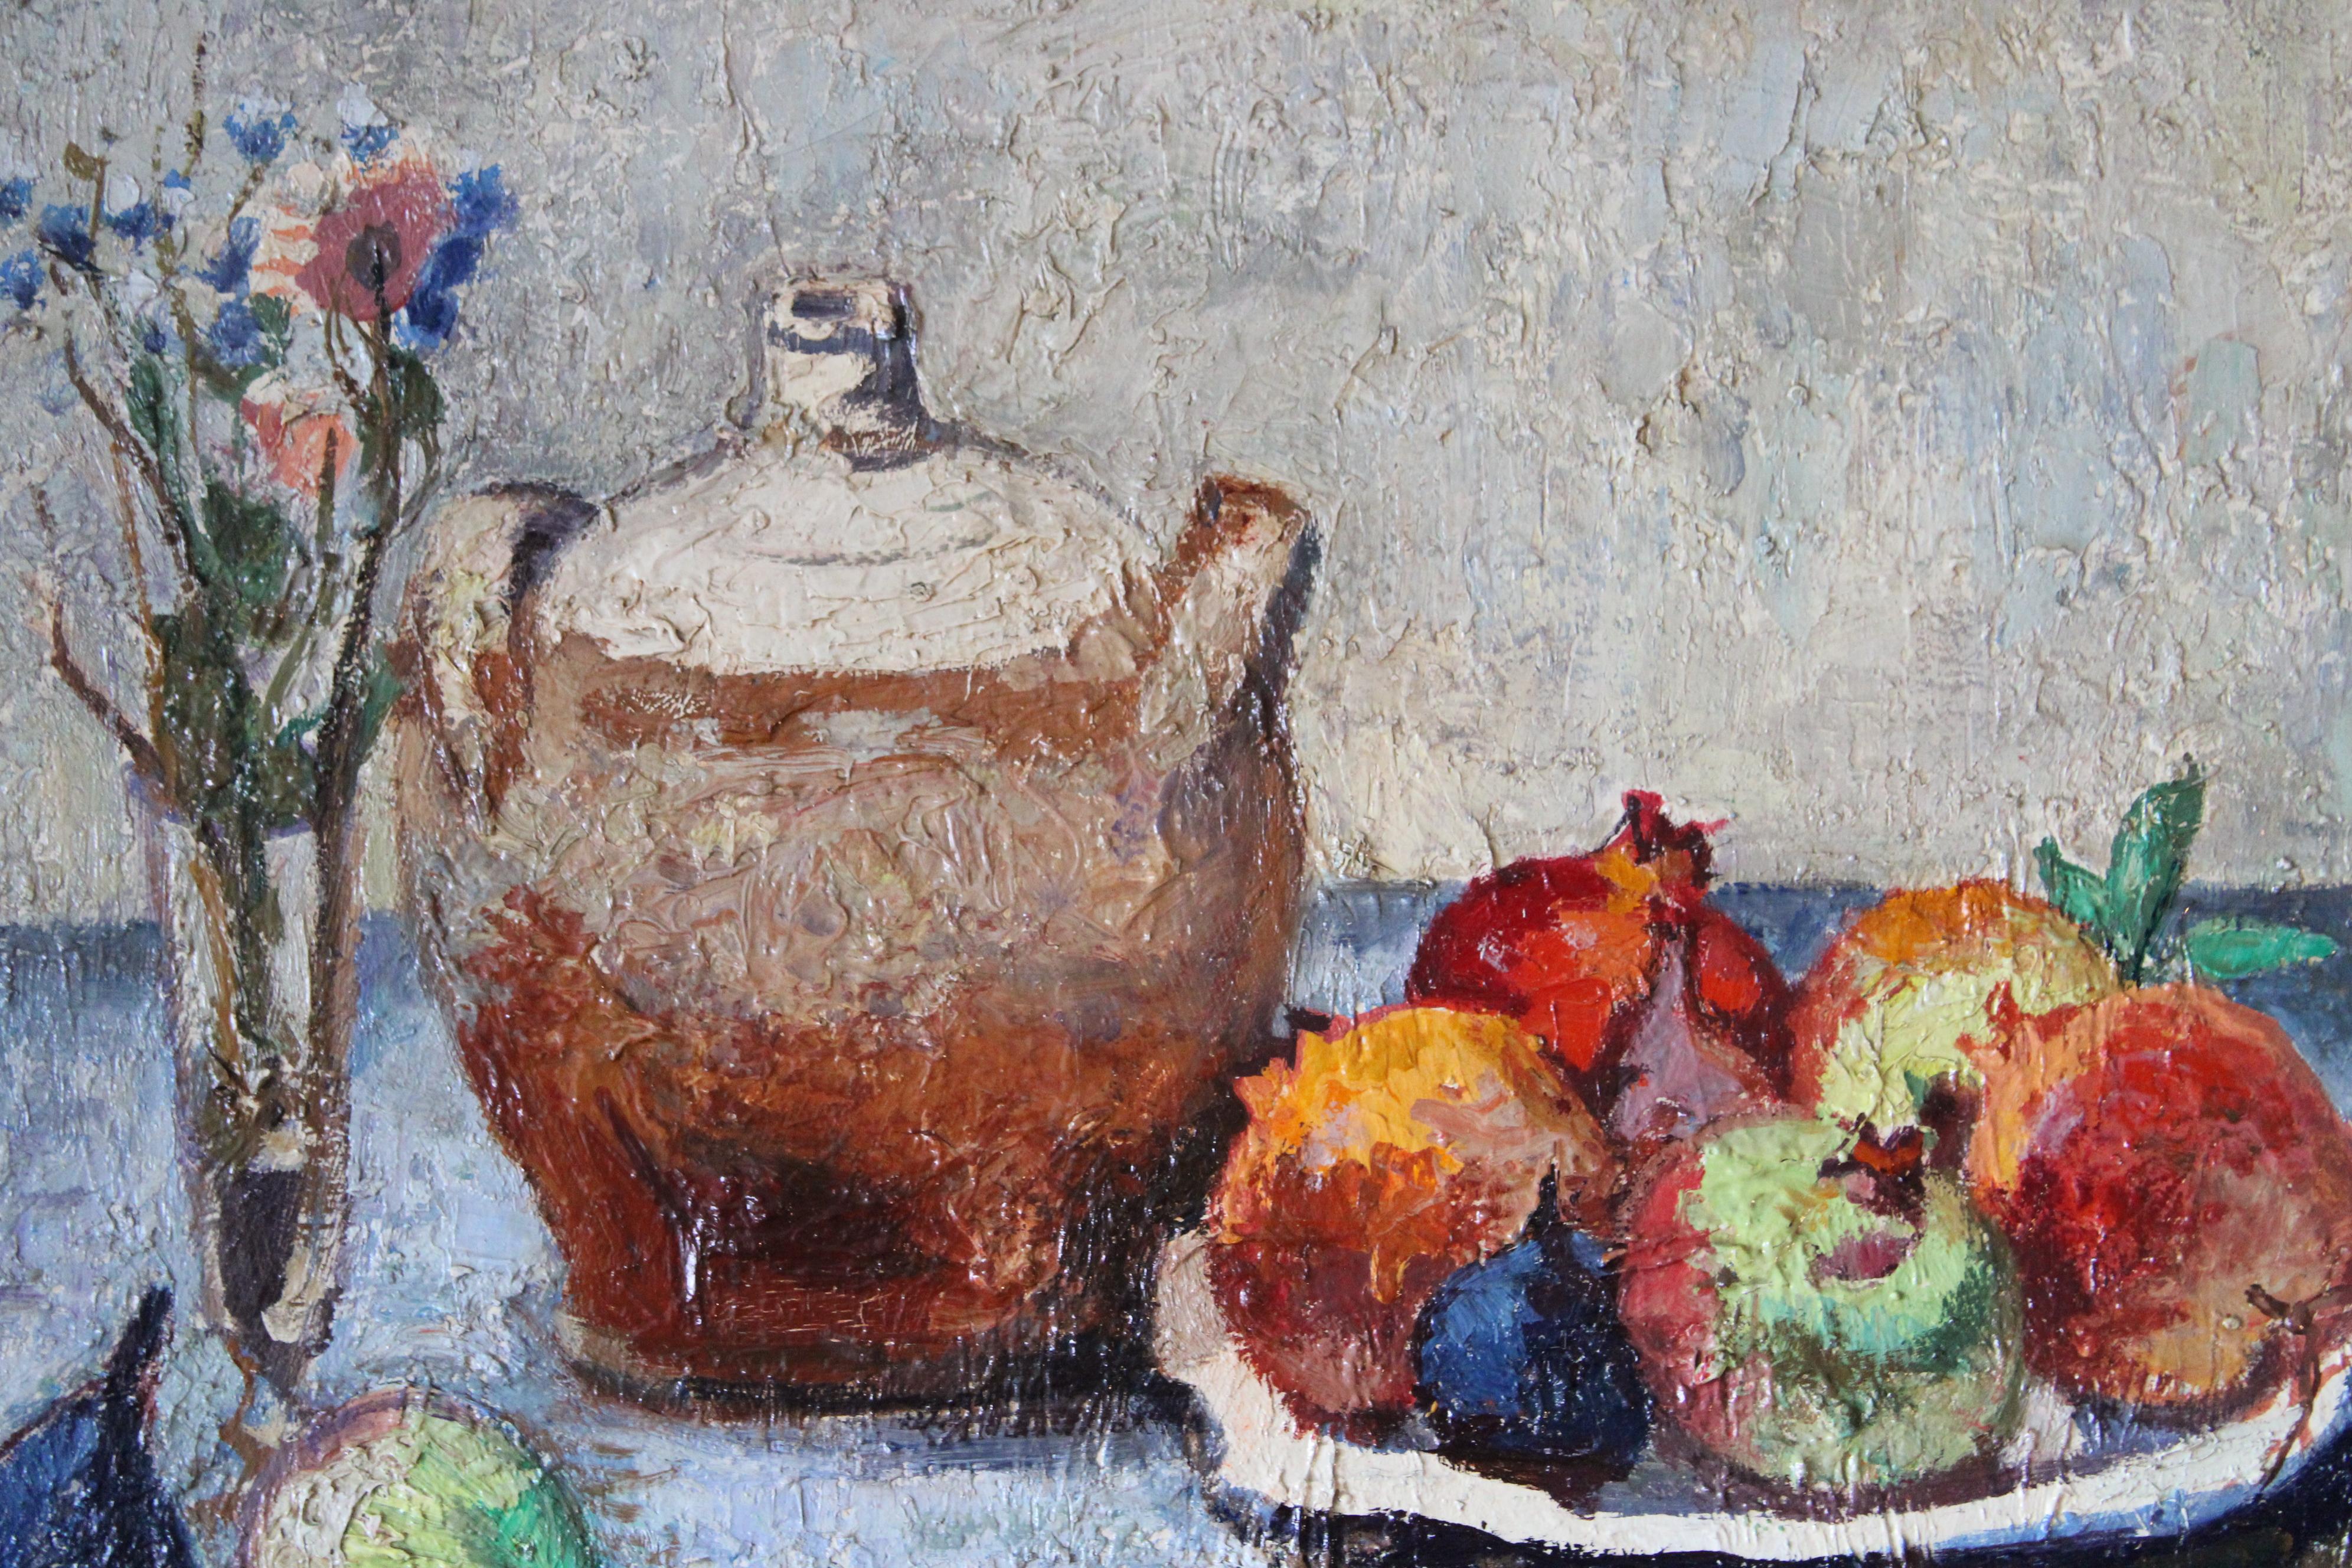 Vintage Still Life oil painting of Pomegranates, Post Impressionist Still Life - Post-Impressionist Painting by Franck Innocent